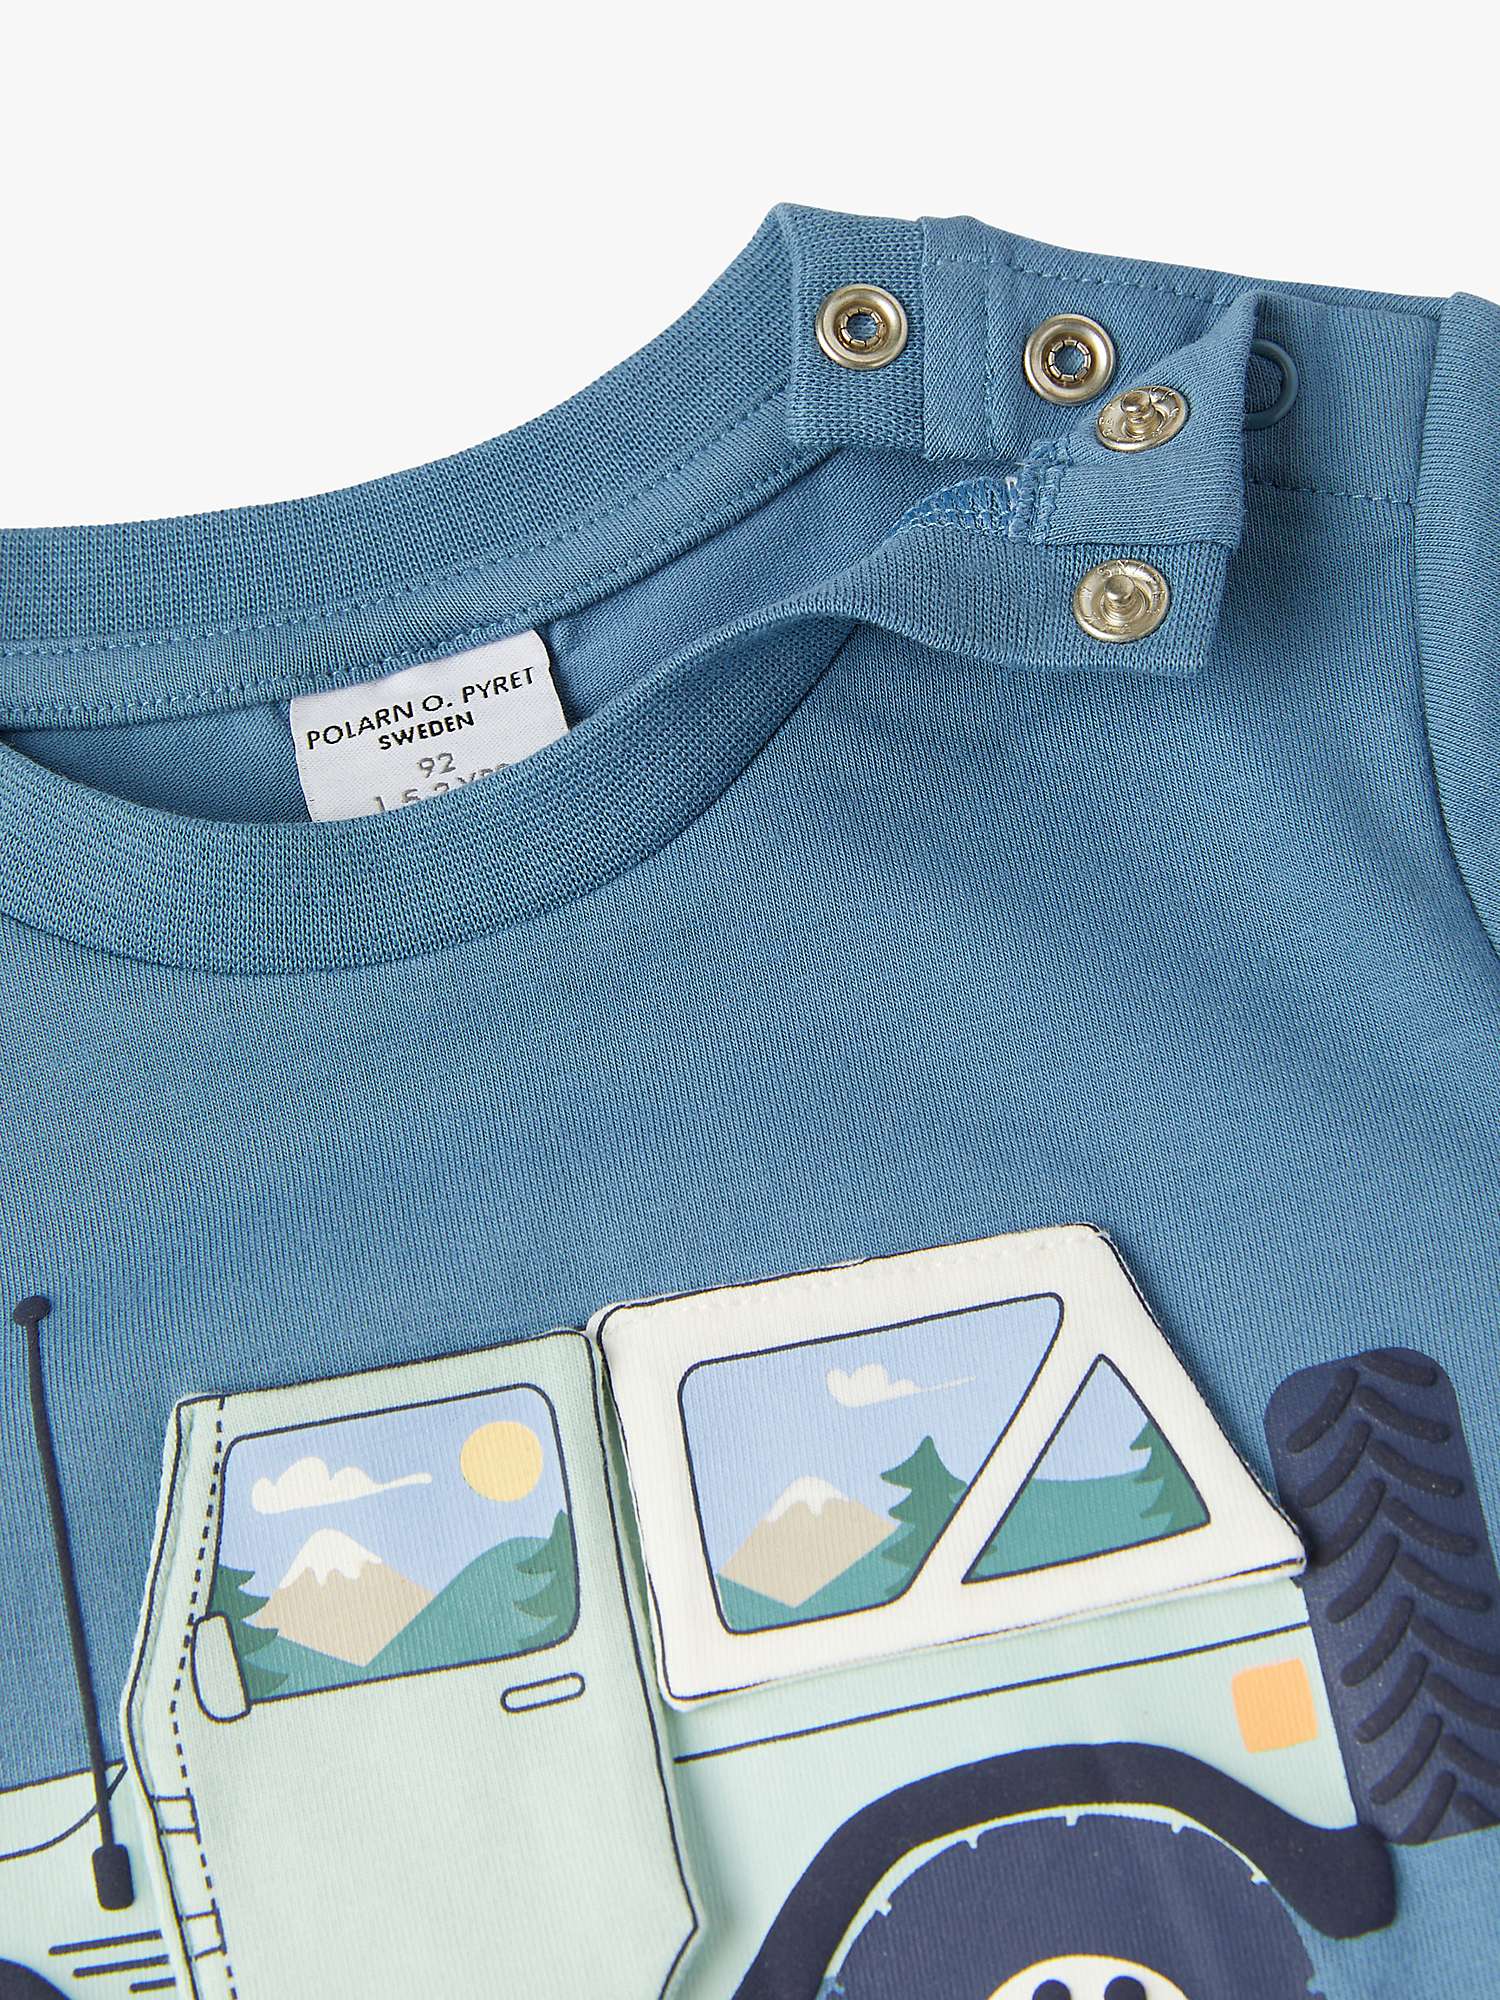 Buy Polarn O. Pyret Kids' Organic Cotton Jeep Long Sleeve Top, Blue Online at johnlewis.com